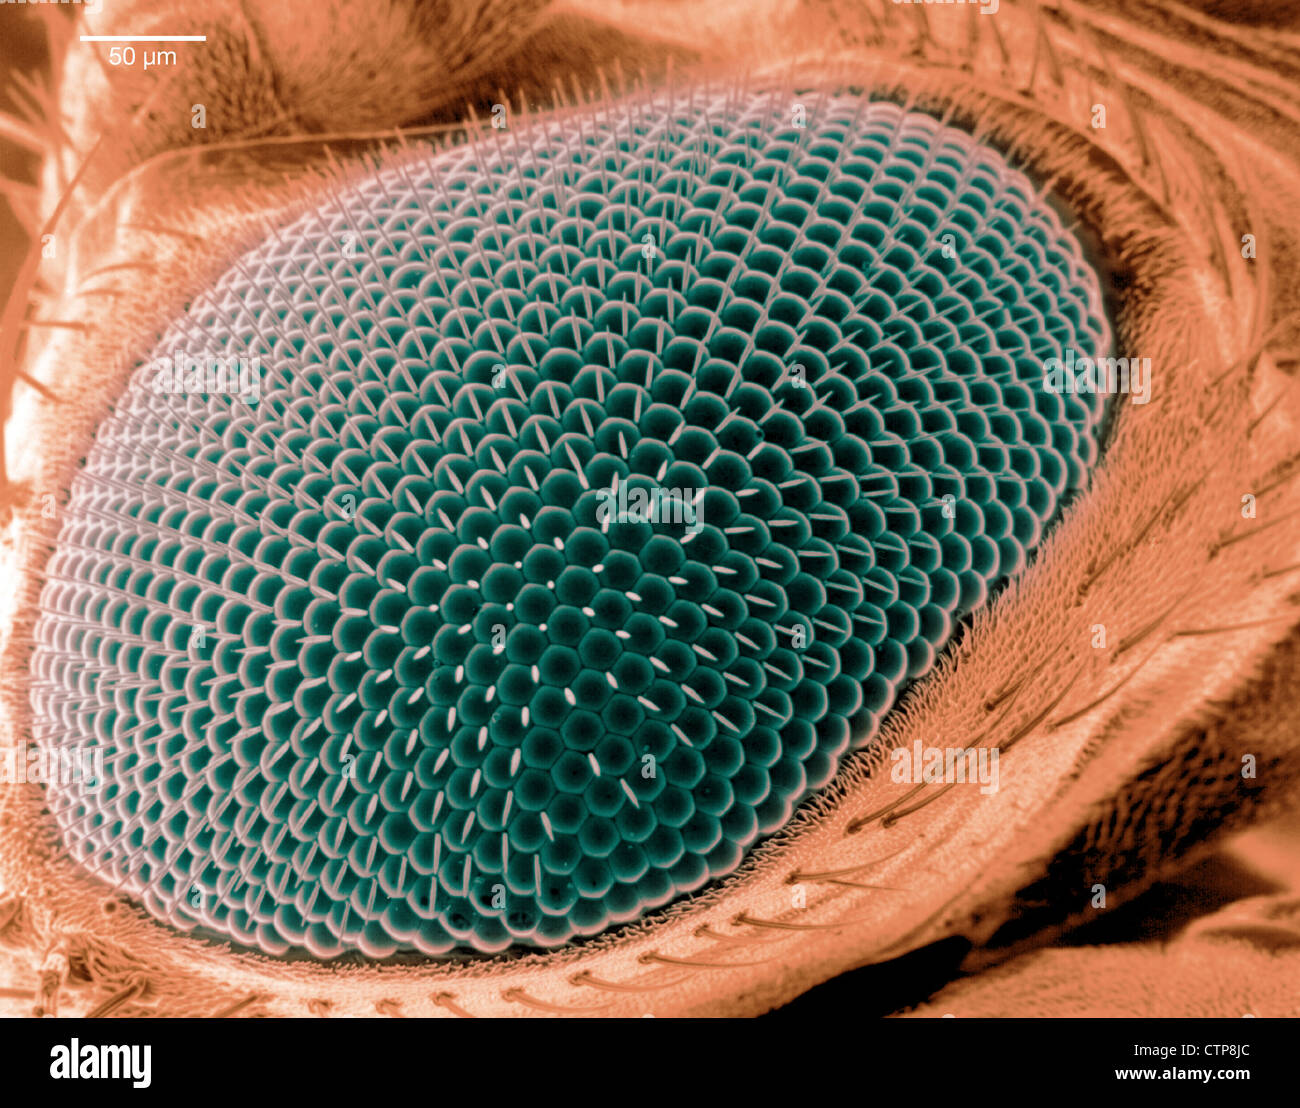 Scanning electron microscope image of an eye on a fruit fly. Stock Photo